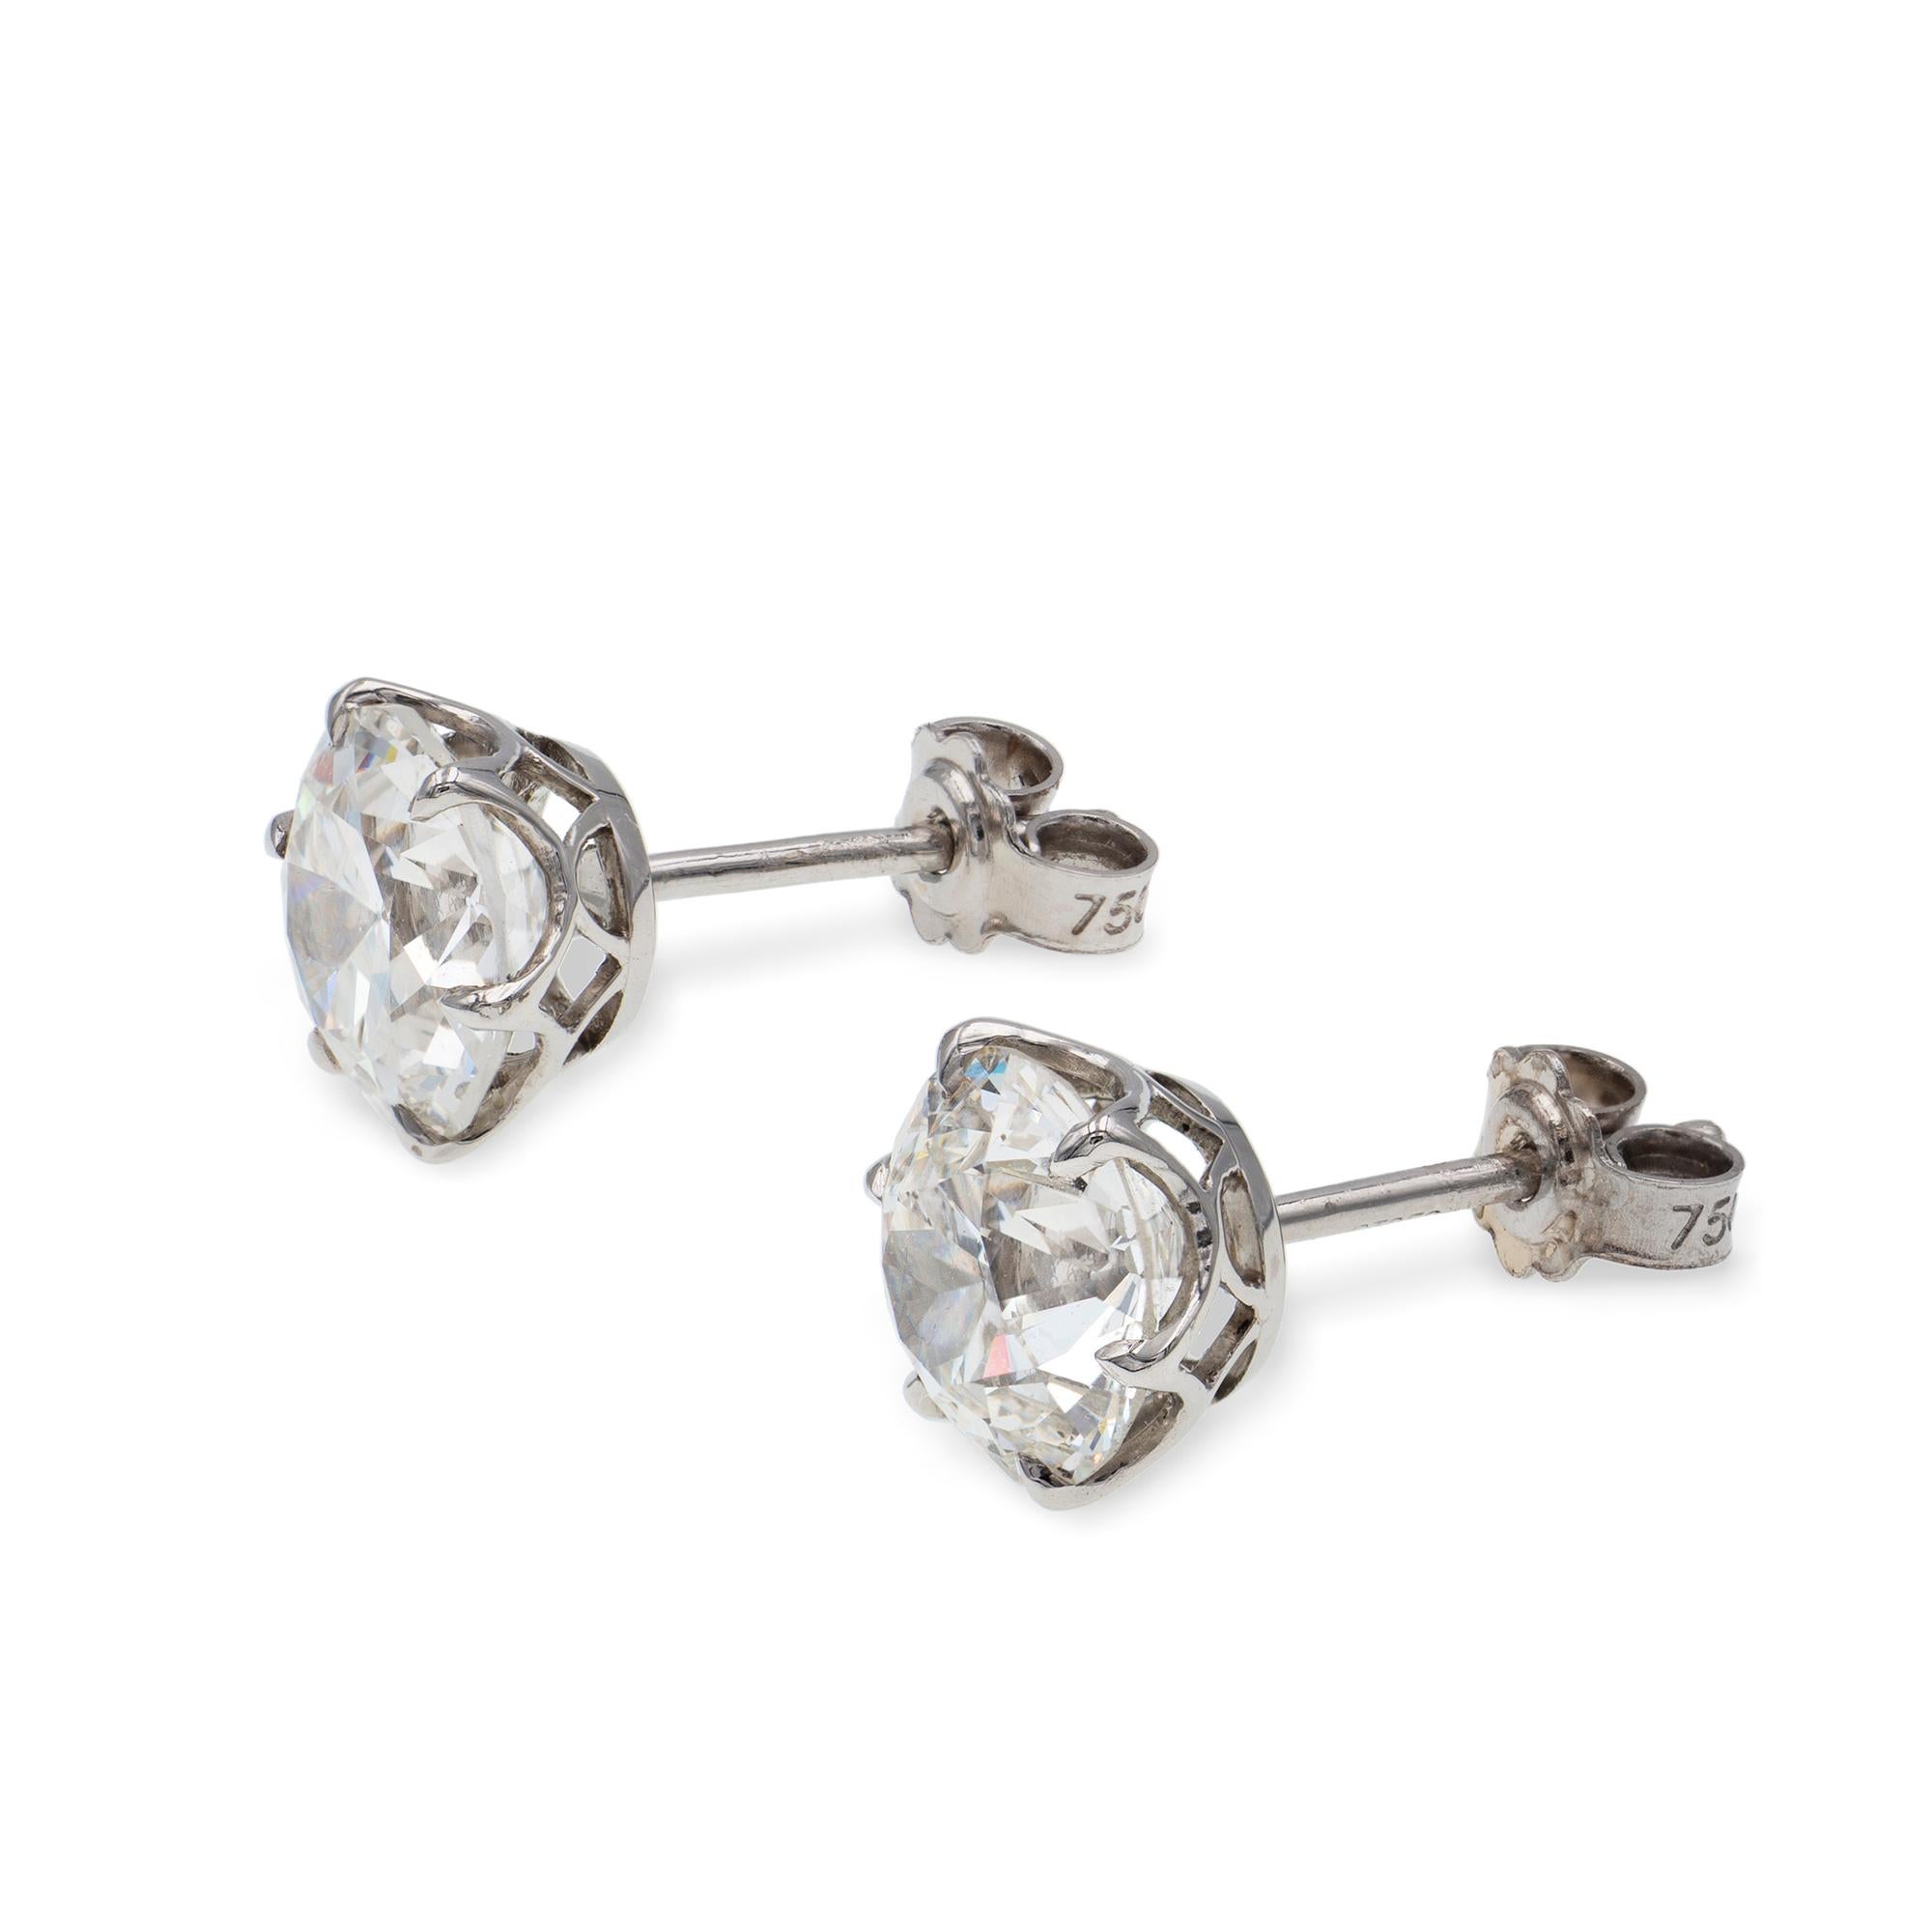 A pair of old-cut diamond stud earrings, the 2.07 carats diamond accompanied by HRD report 170002961964 stating to be of G colour VS2 clarity, the 2.10 carats diamond accompanied by GIA report 5192334059 stating to be of G colour, SI2 clarity, both